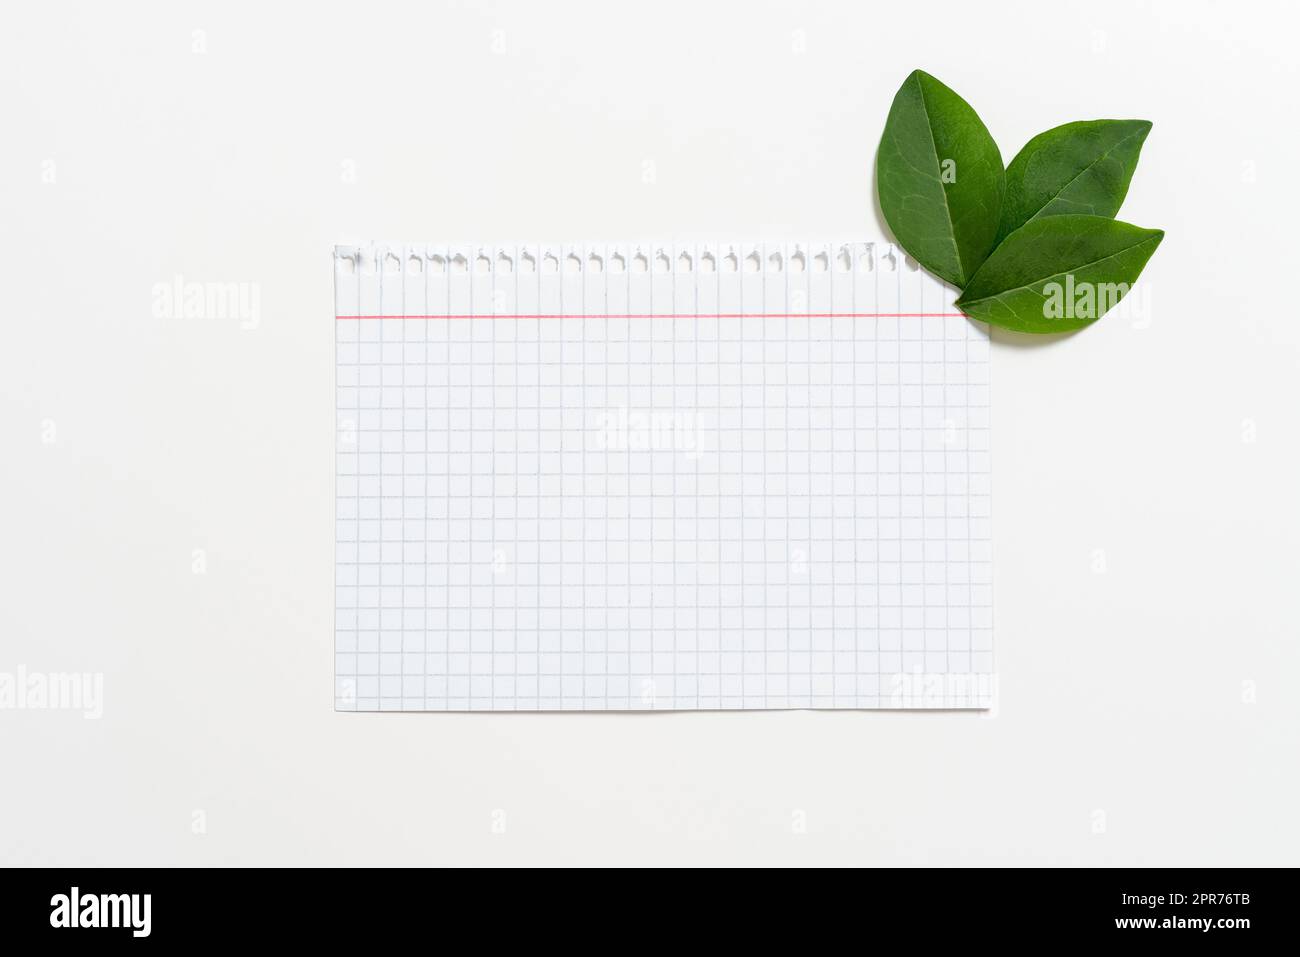 Notebook Paper With Checked Patterned Lines And Leaves Decorated For Displaying Education. Empty Page With Fresh Botany Arranged For Promoting Company Brand. Stock Photo